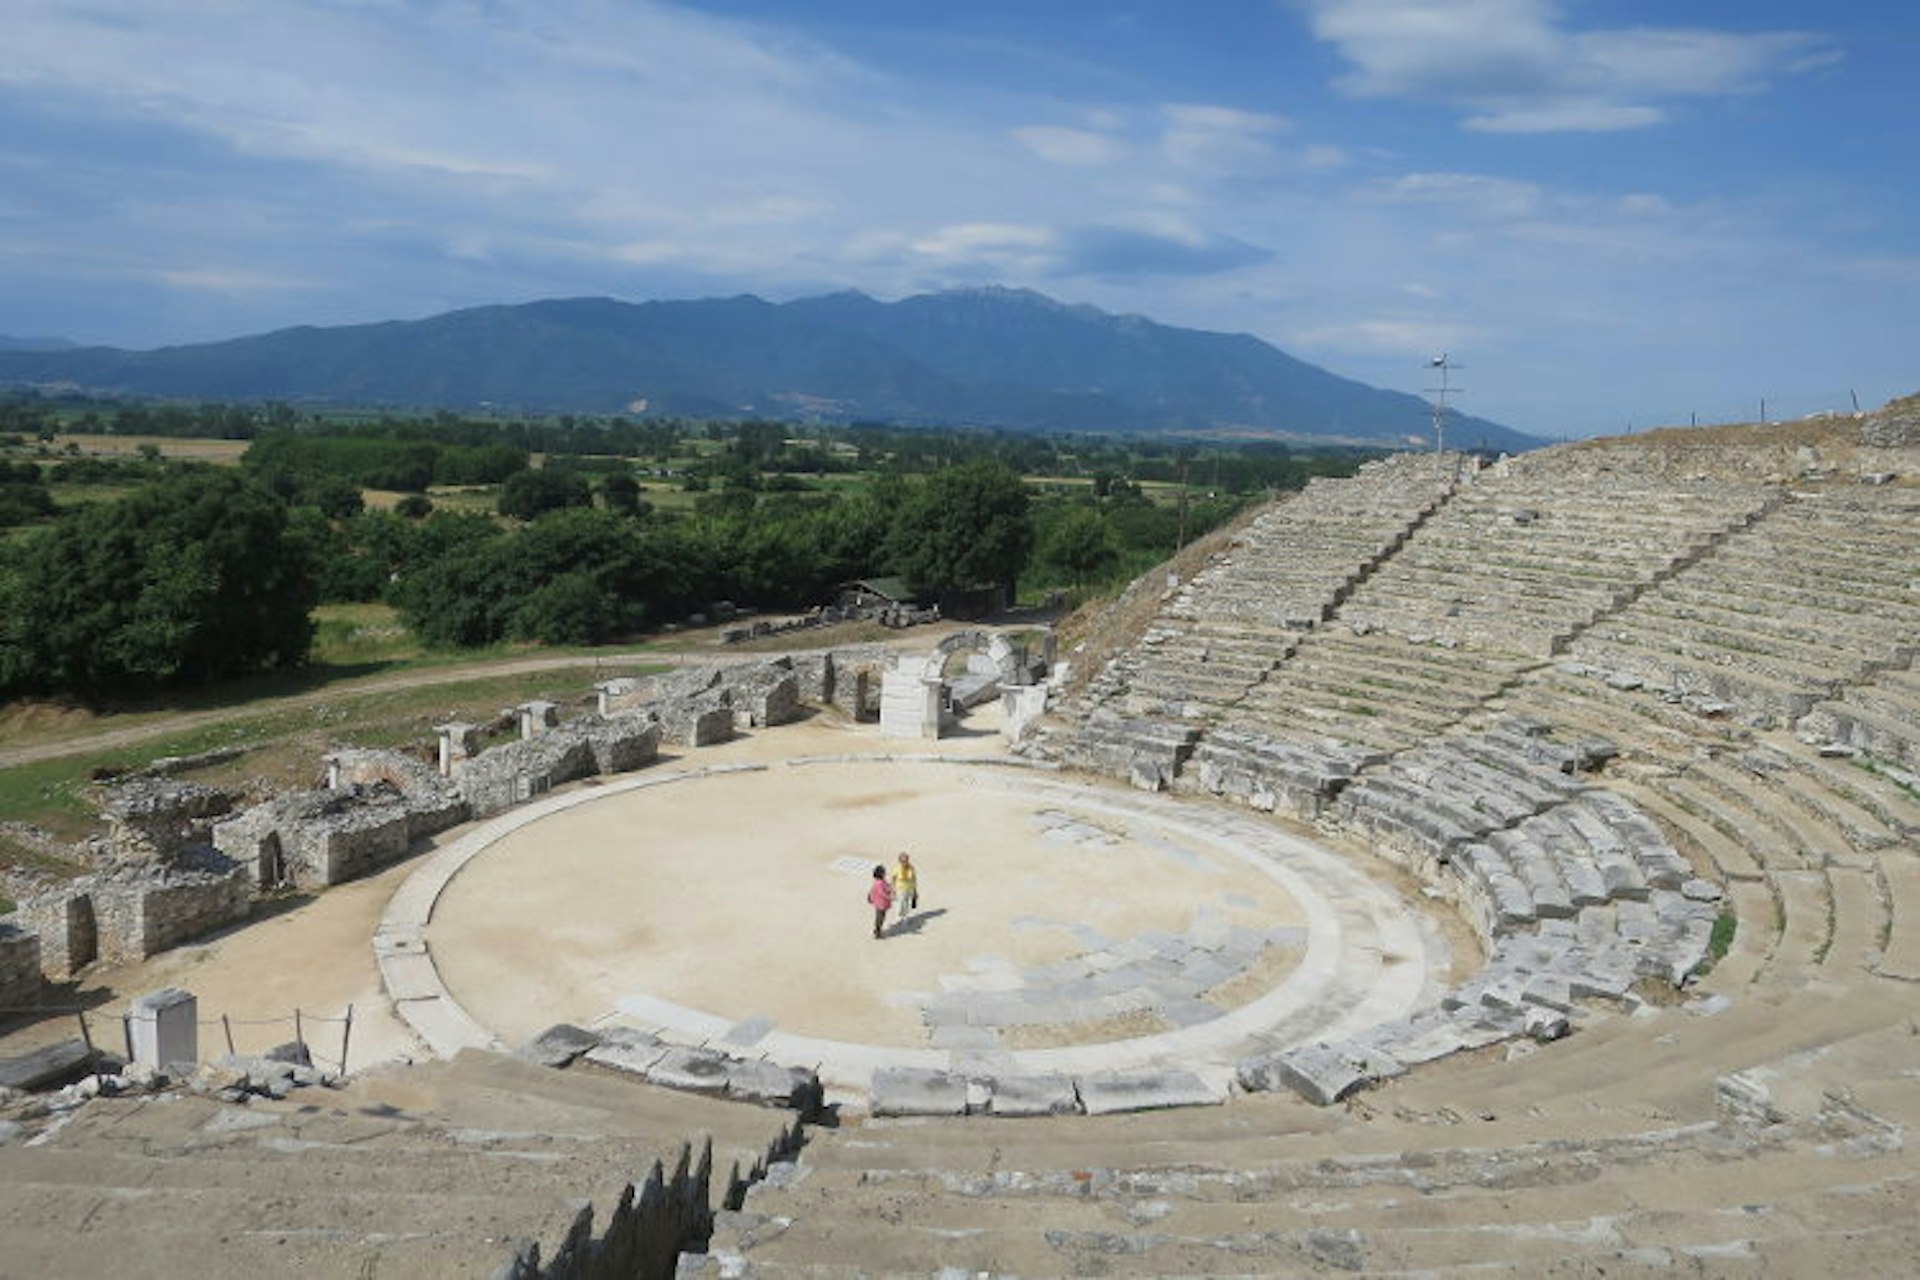 Ancient theatre of Philippi, believed to be built by Philip II of Macedonia. Image by Karyn Noble / Lonely Planet 